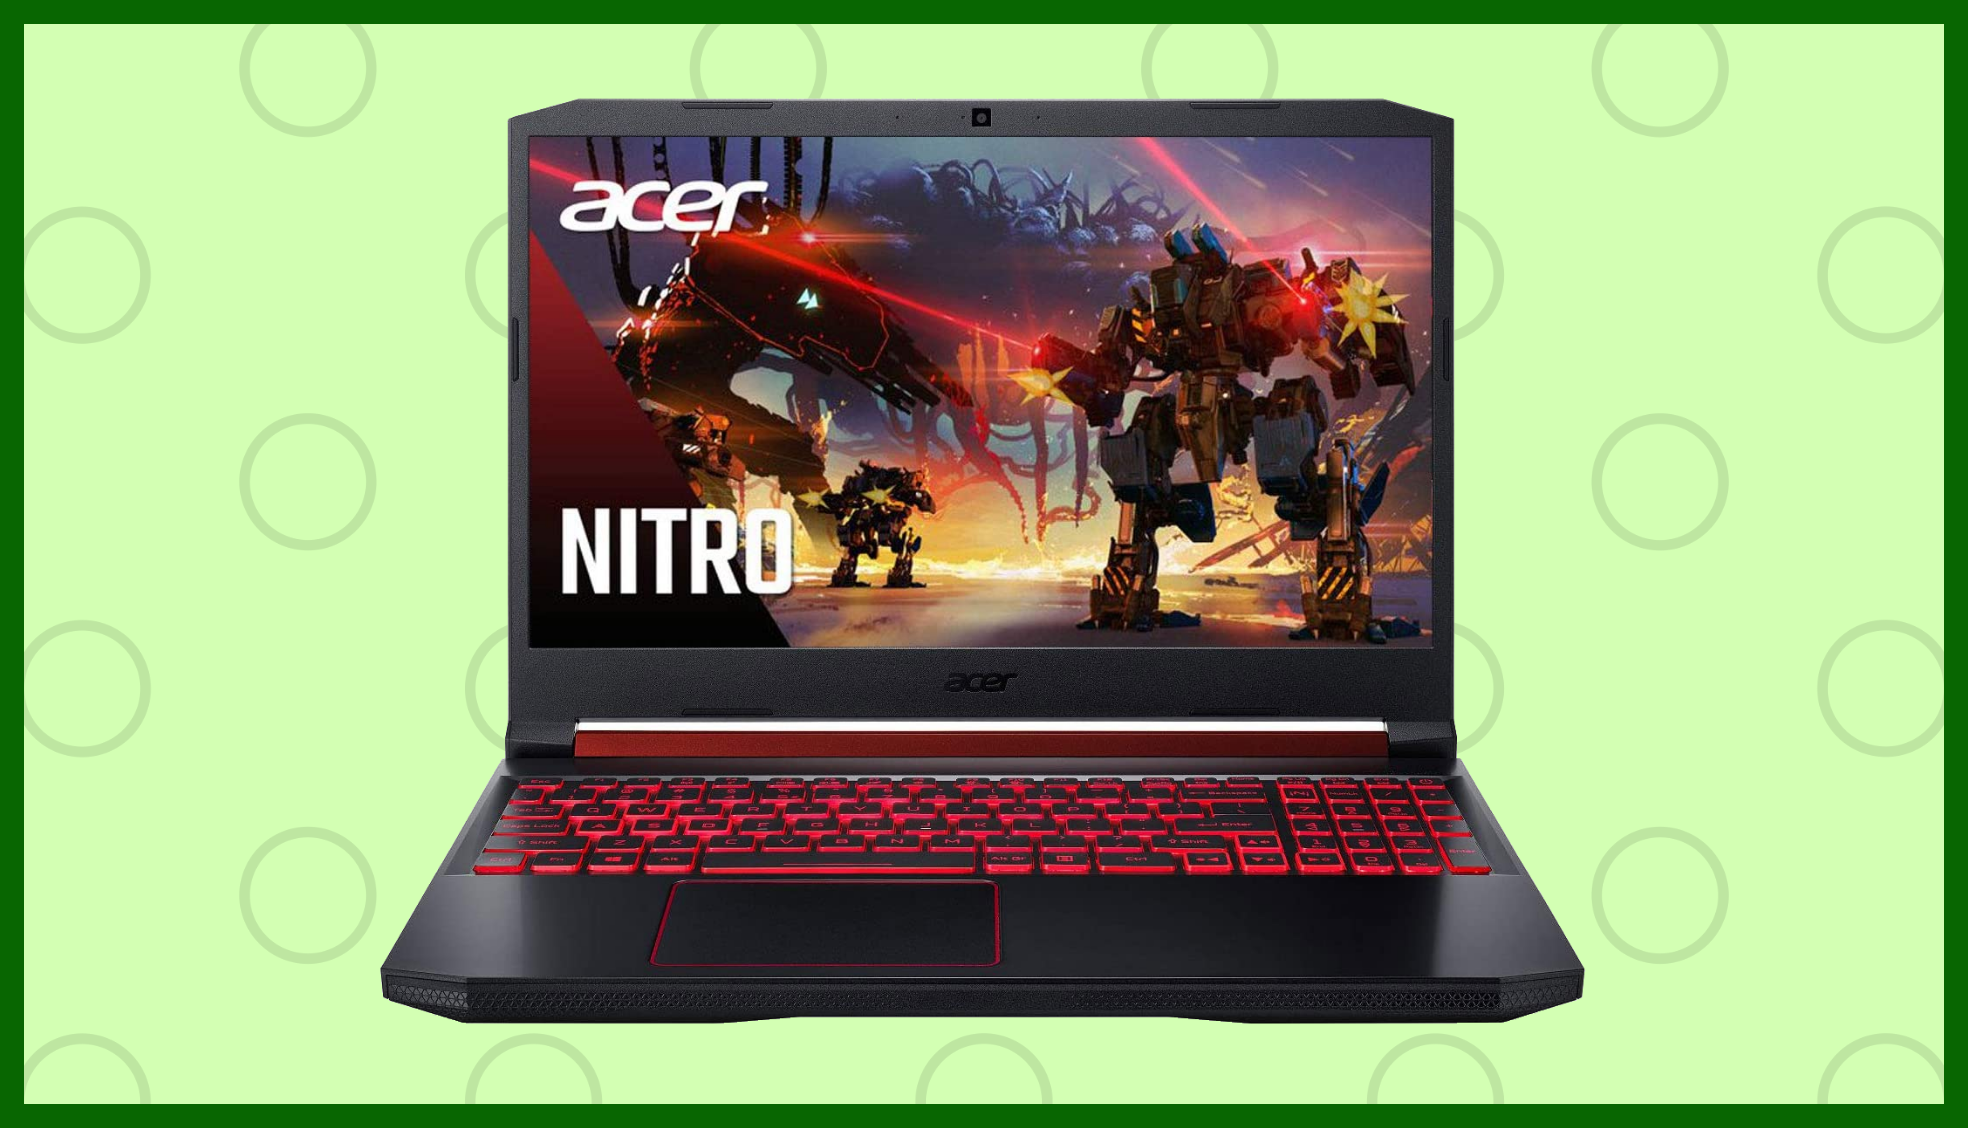 Acer Nitro 5 Gaming Laptop is on sale at Amazon